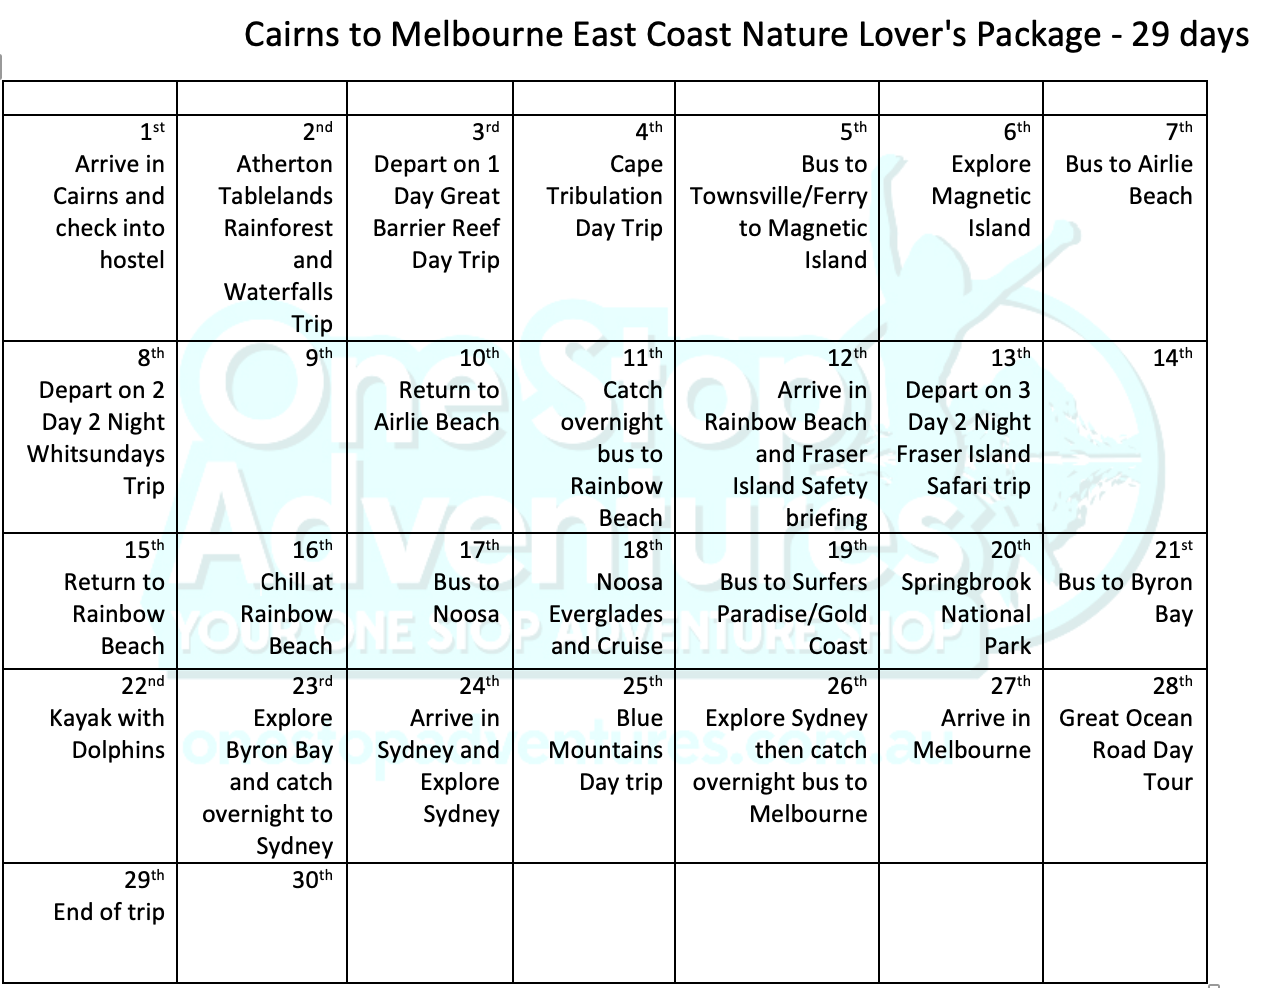 Cairns to Sydney East Coast Itinerary